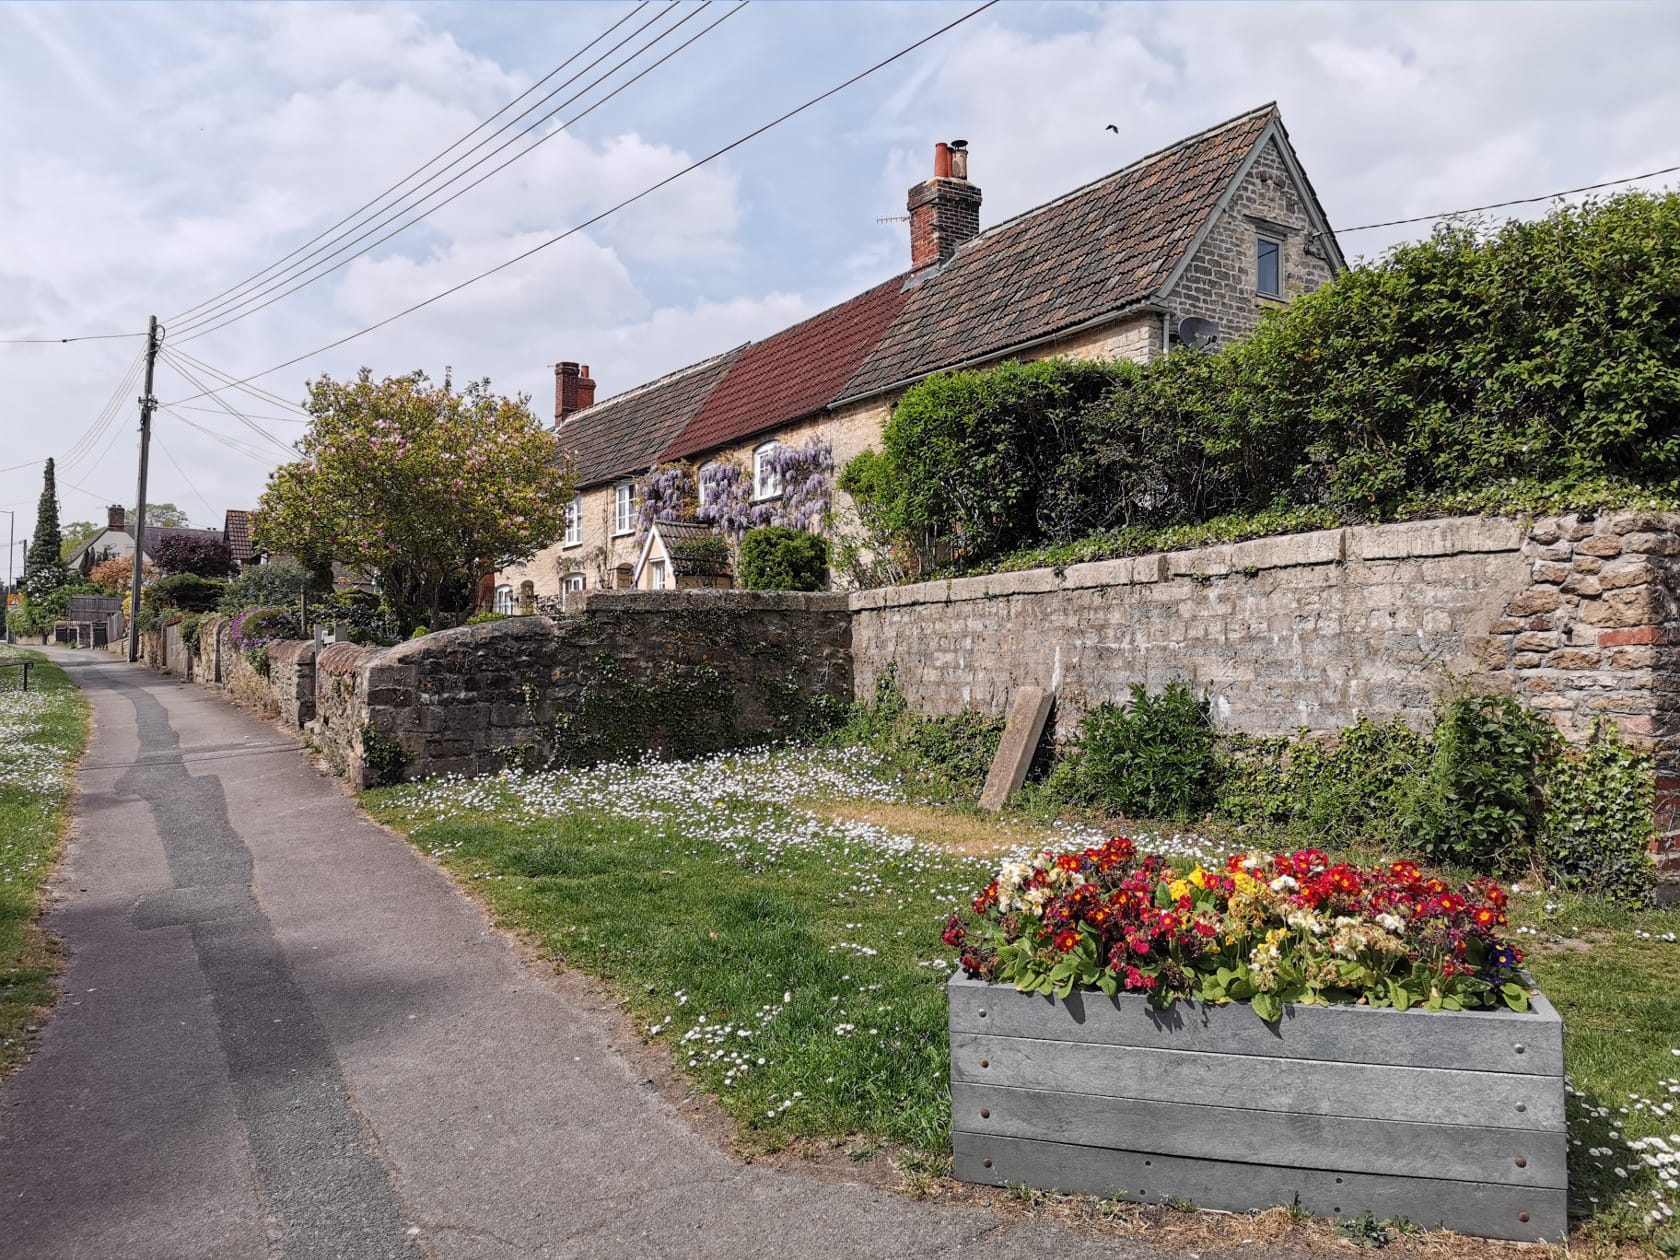 Huawei P30 Pro camera sample of a street and houses